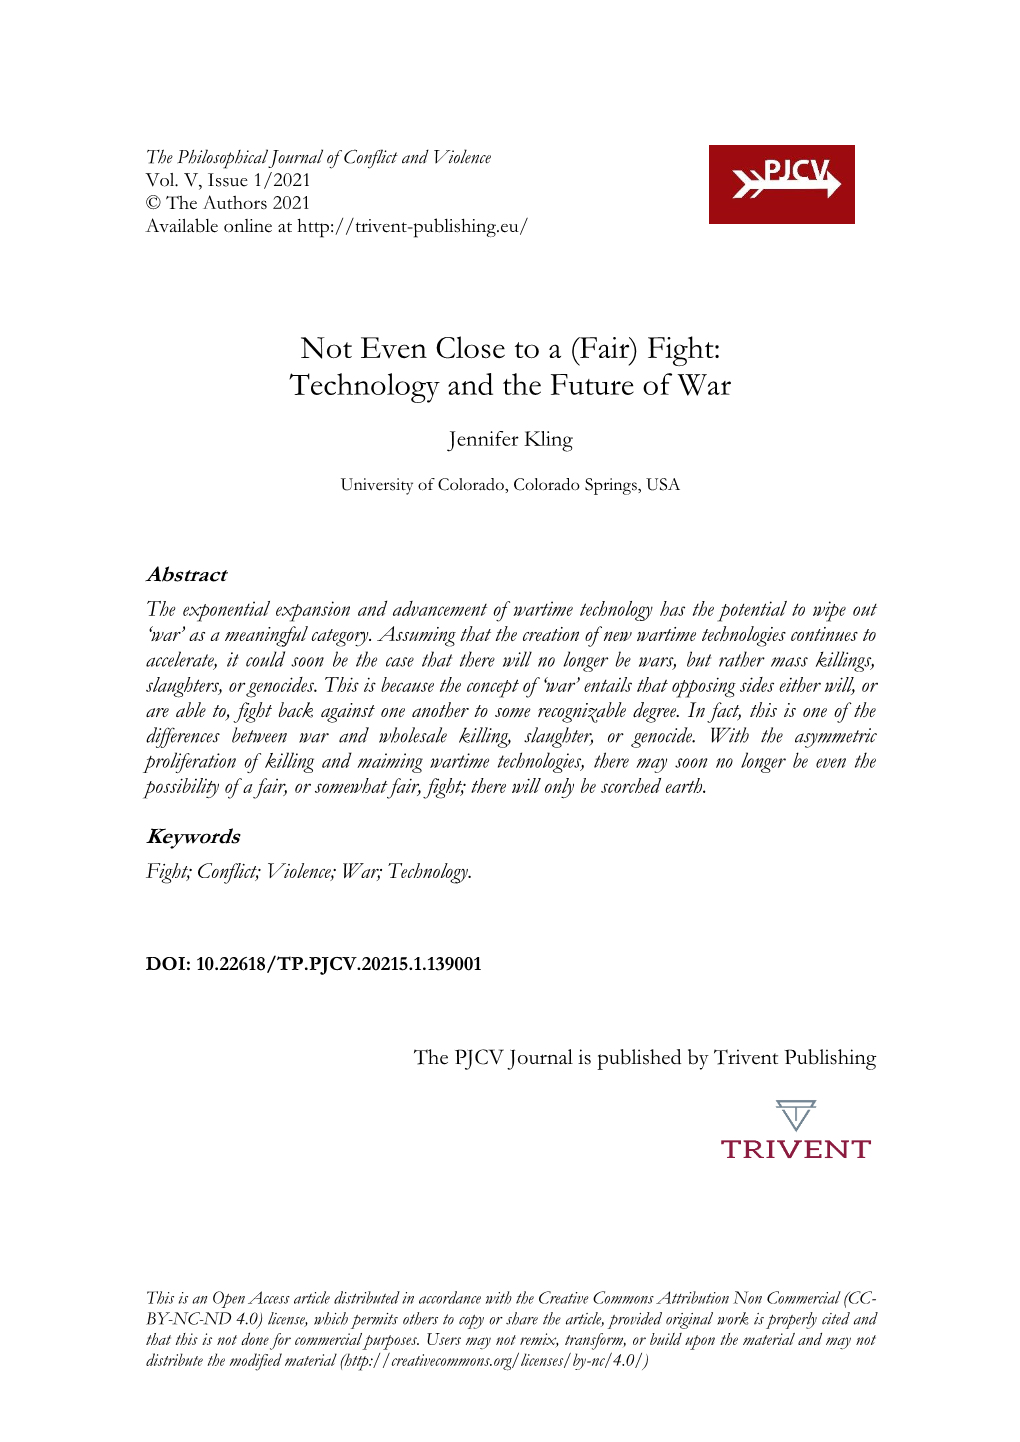 (Fair) Fight: Technology and the Future of War